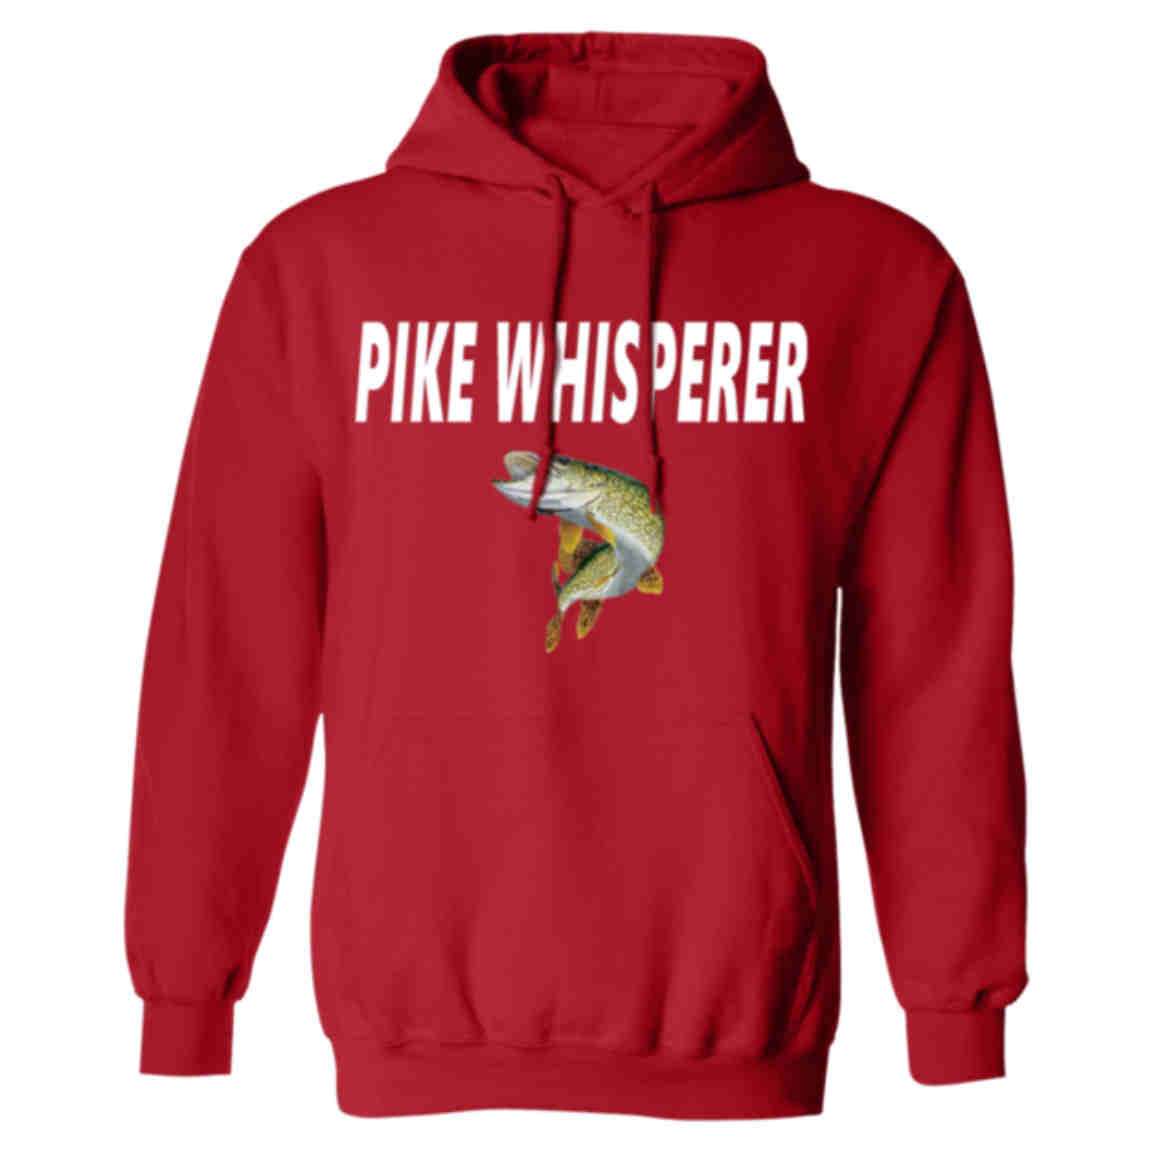 Pike whisperer hoodie w red